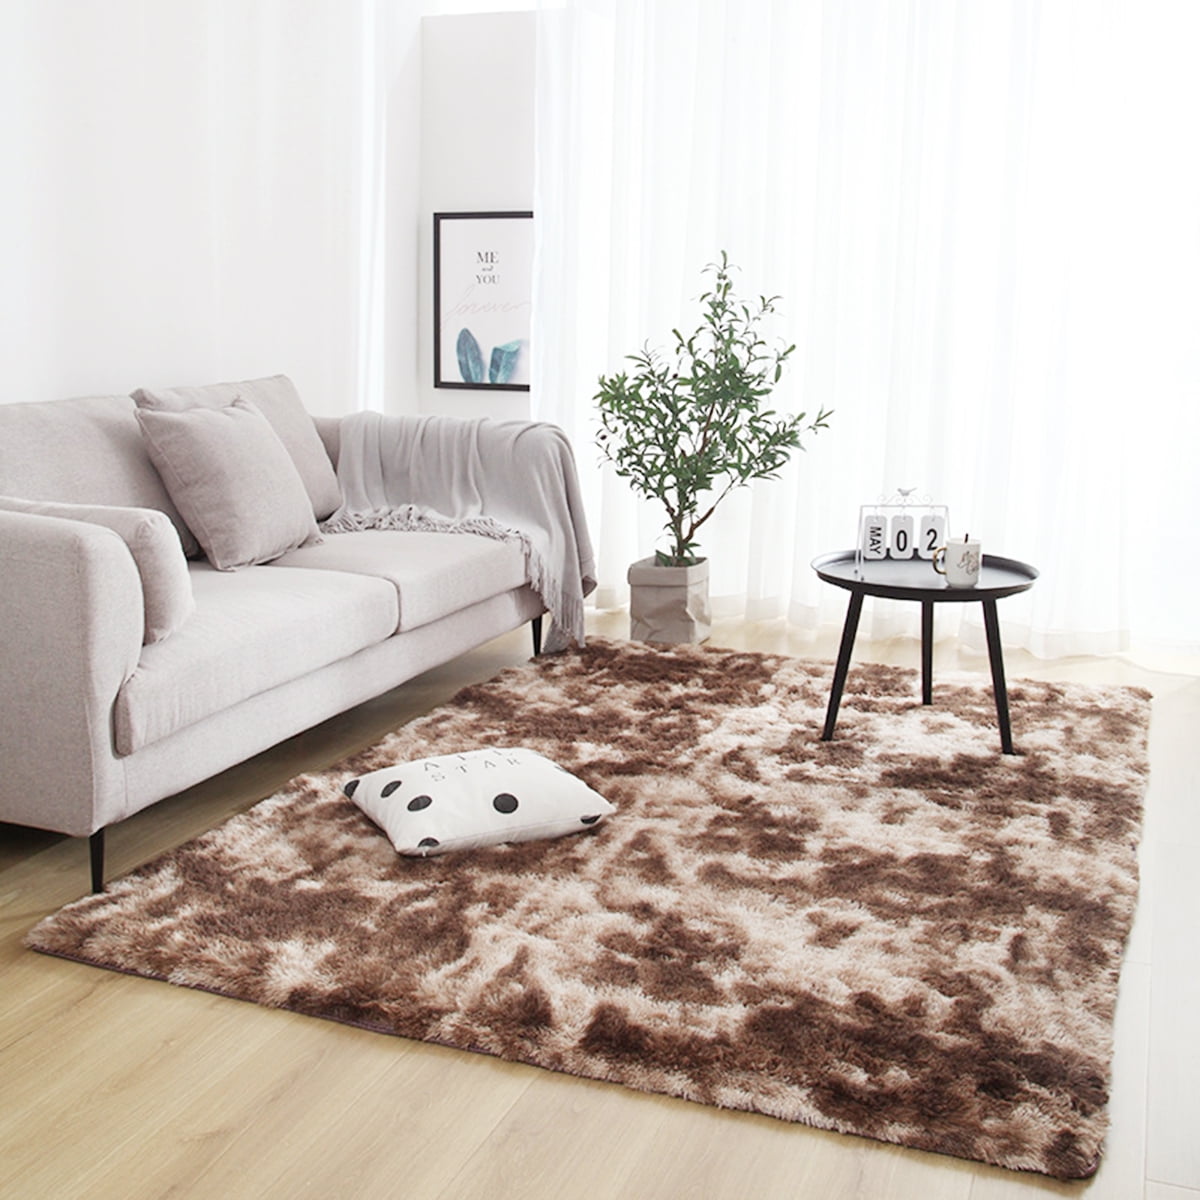 Details about   Fluffy Rug Large/Small Area Rug Faux Fur Shaggy Living Room Floor Mat Carpet Hot 